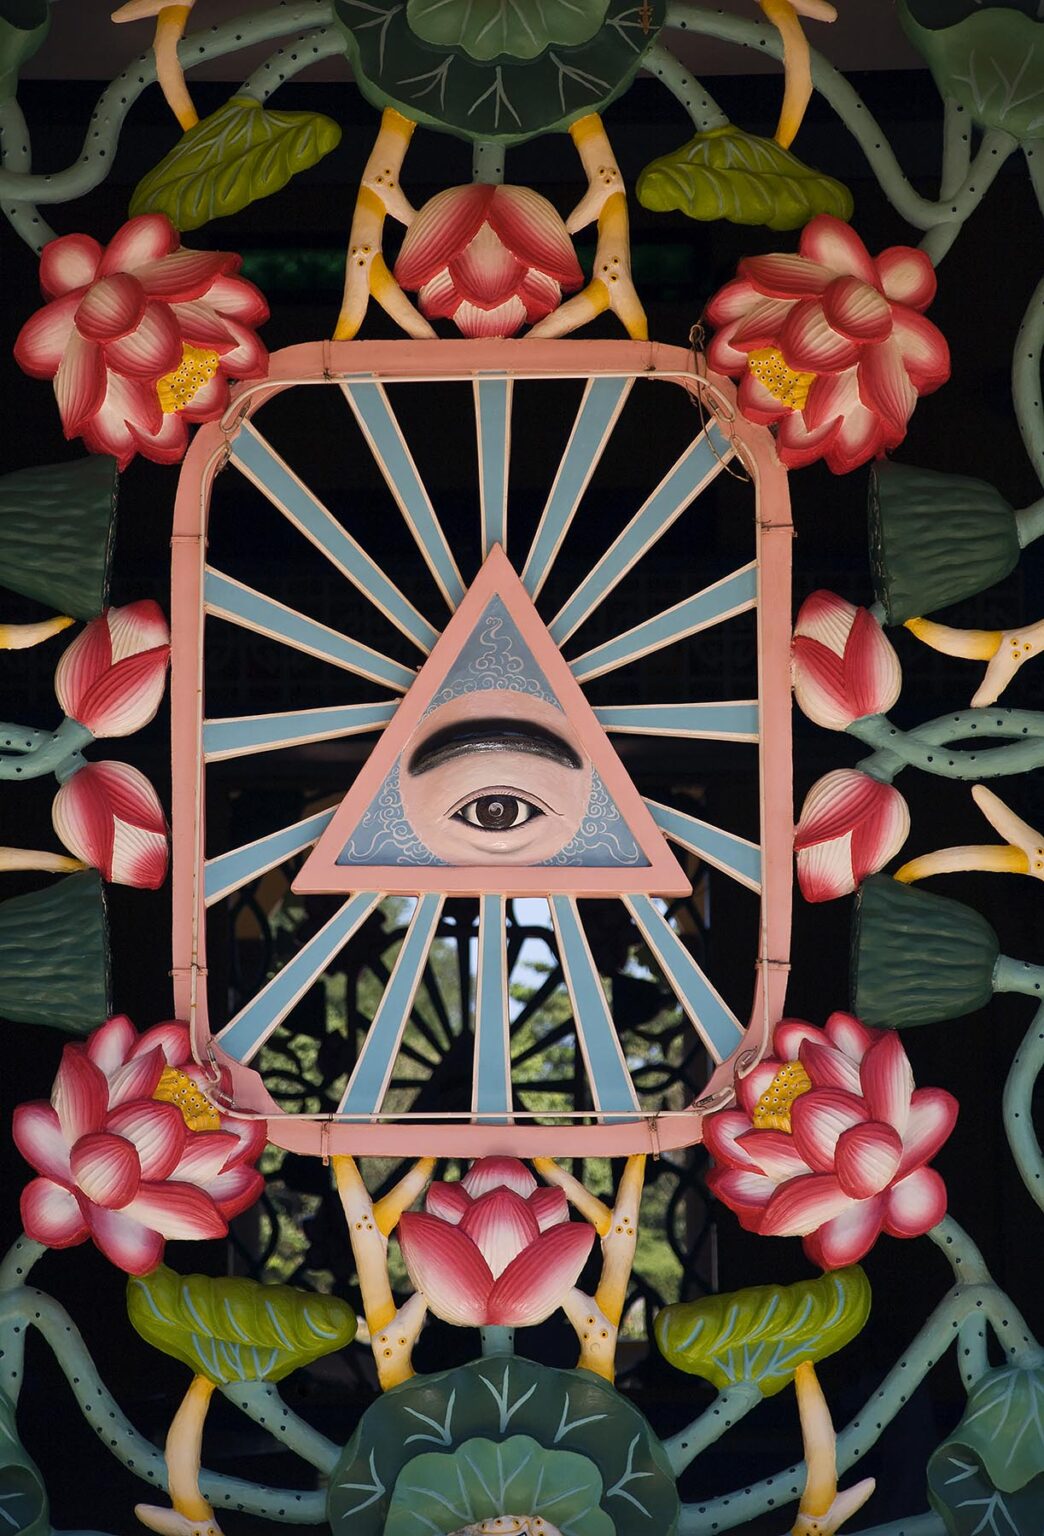 A window display depicting the DIVINE EYE at the CAO DAI GREAT TEMPLE, TAY NINH VILLAGE, VIETNAM